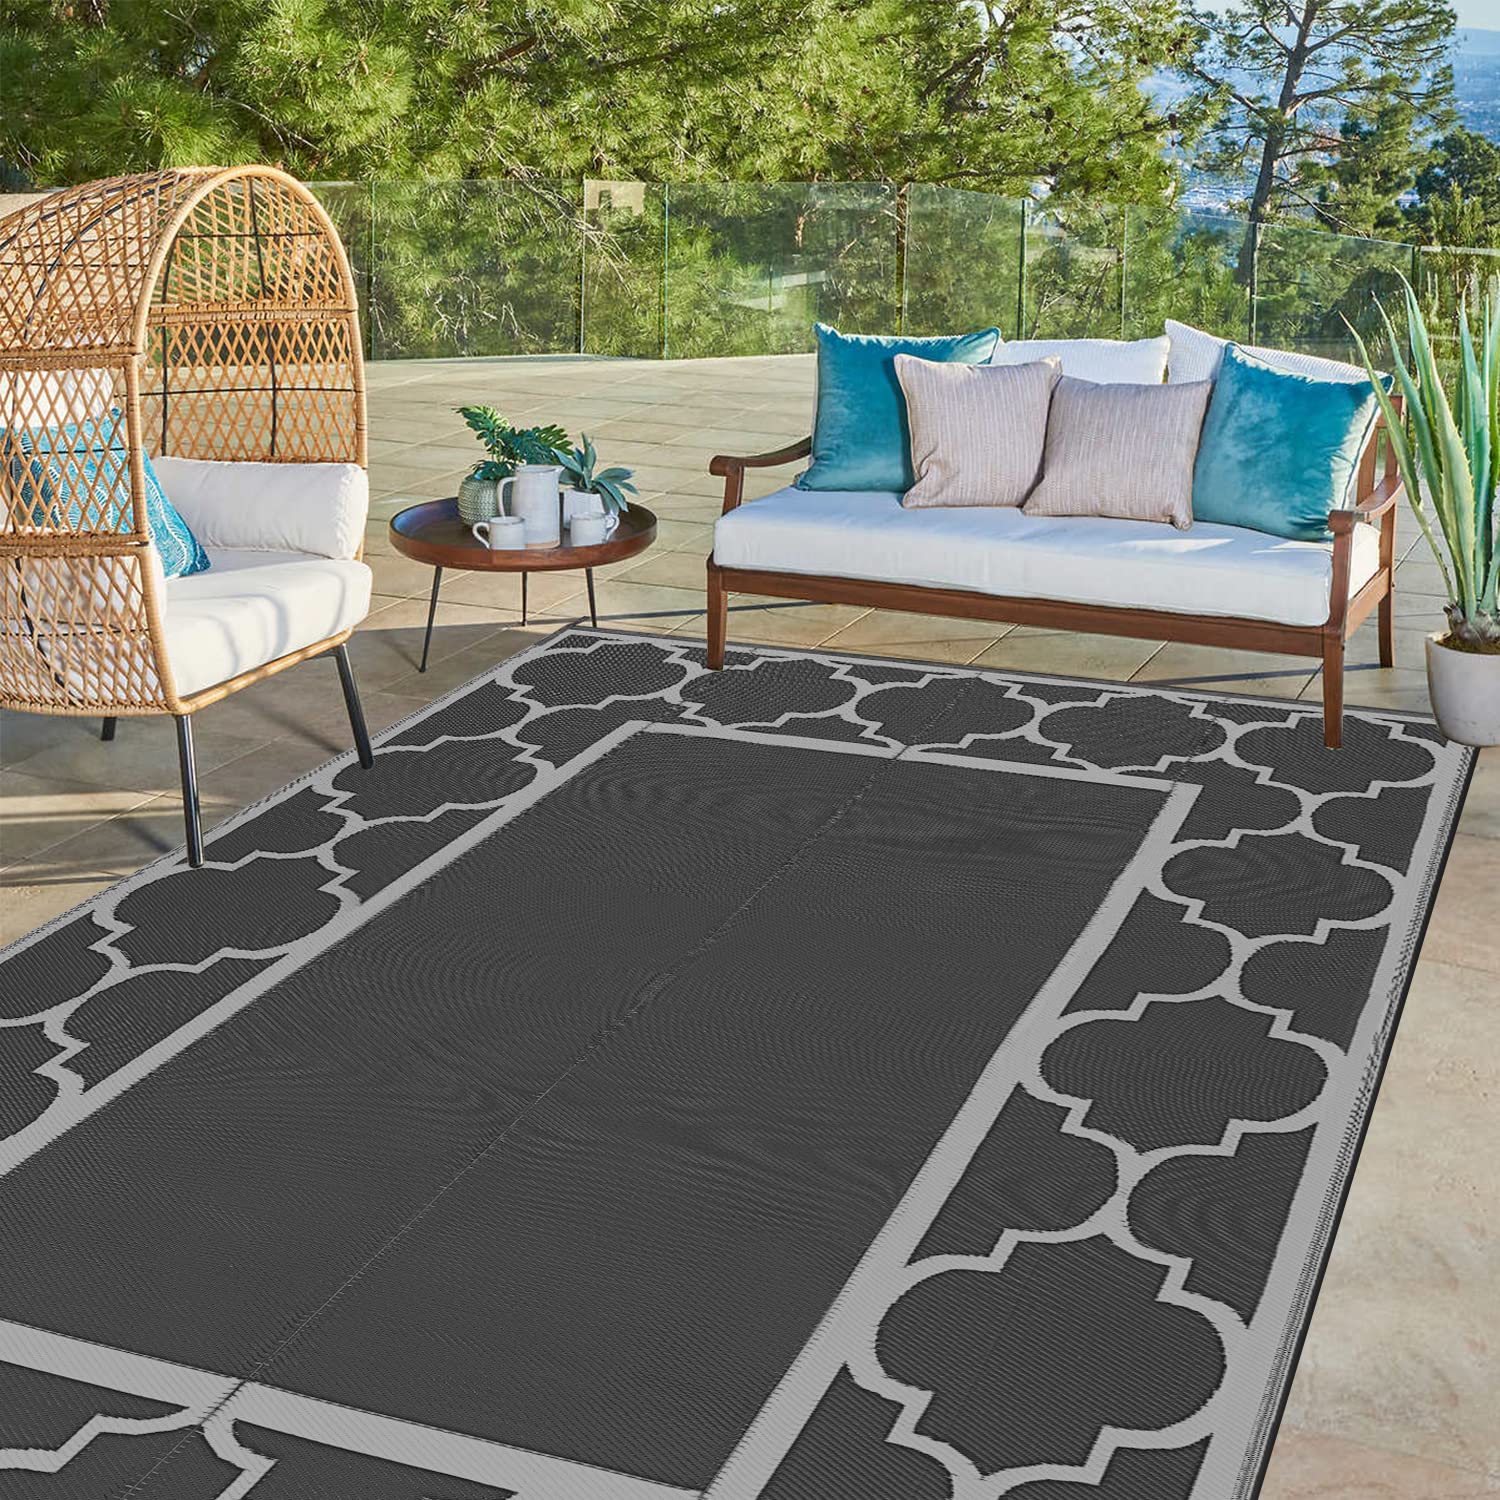 Tayse Double Sided, Water Resistant Indoor Outdoor Rug 2x3 | Outdoor Rugs for Patio, Deck, Porch, Entryway | Fade Resistant Outside Area Rug | 2' x 3